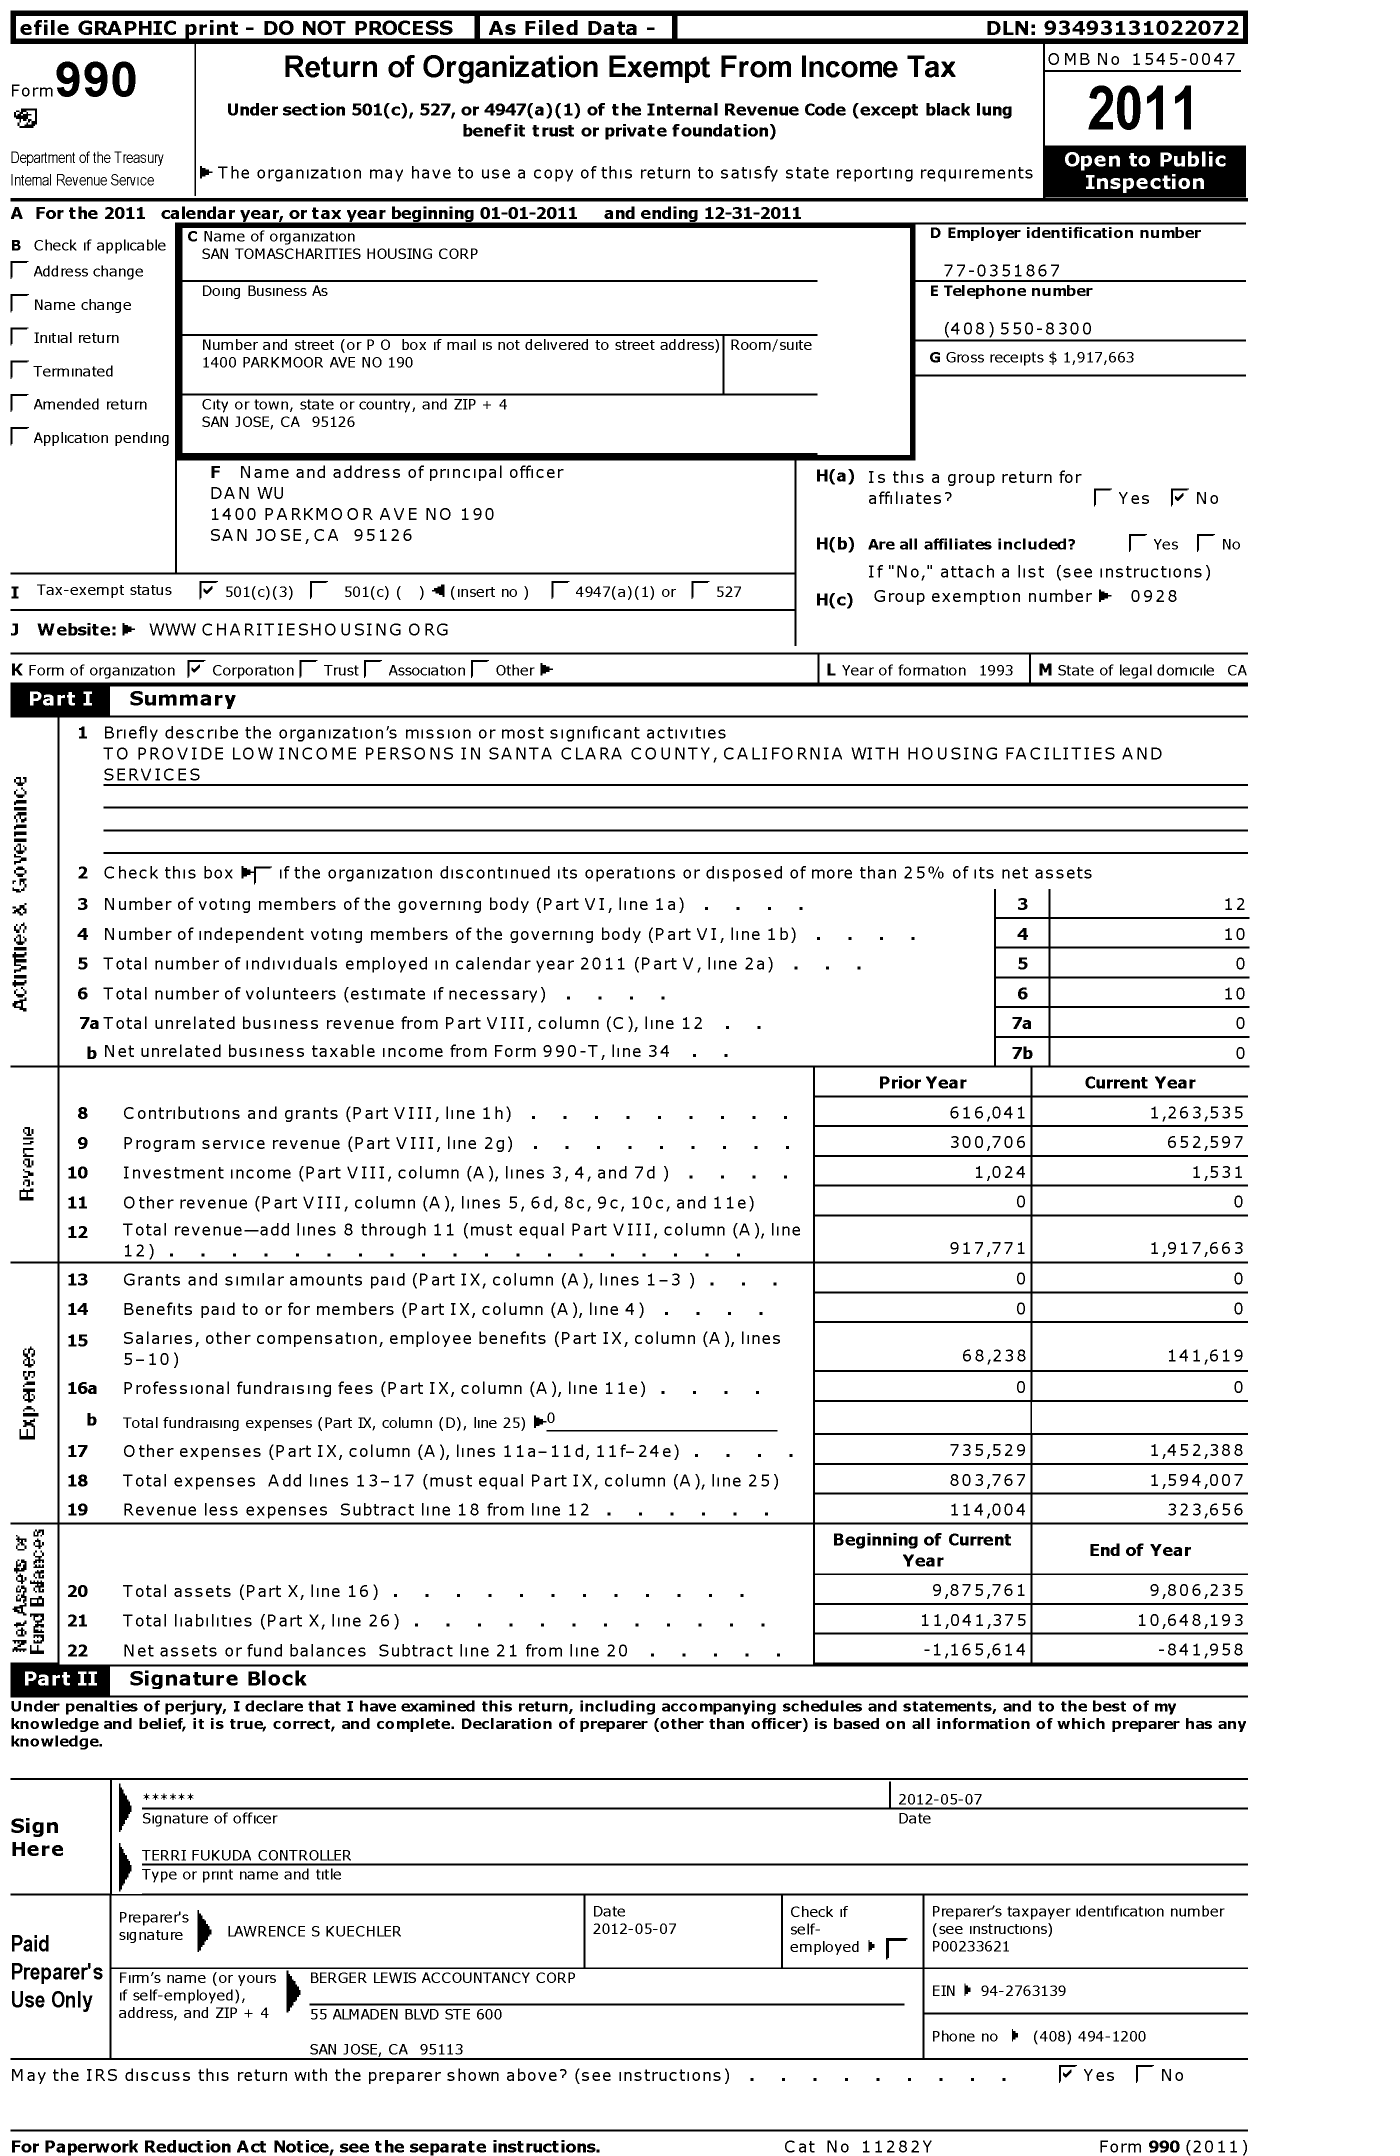 Image of first page of 2011 Form 990 for San Tomascharities Housing Corporation